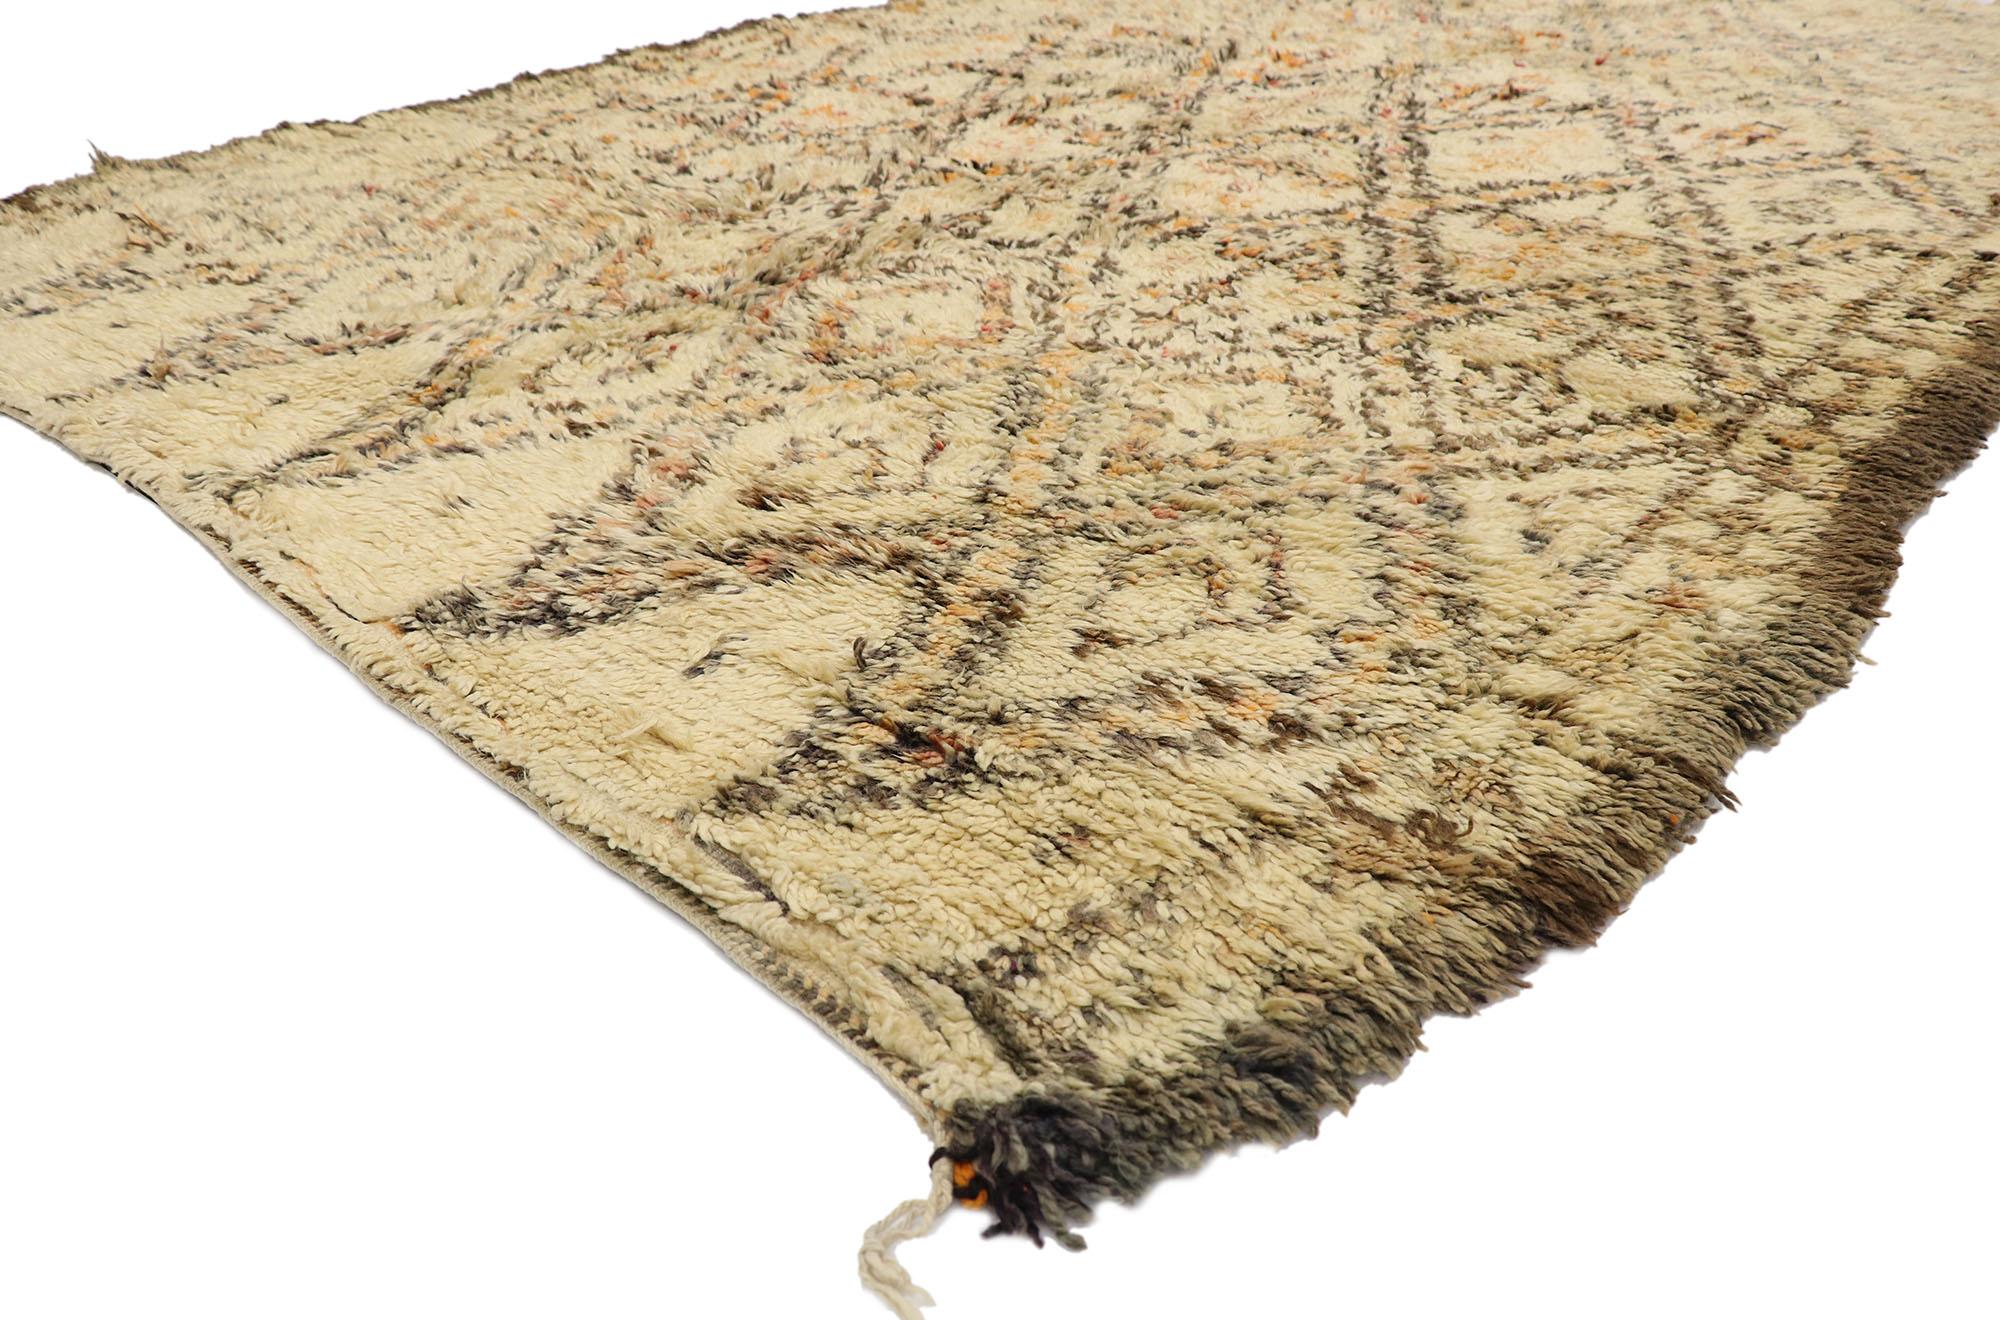 21412 Vintage Beni Ourain Moroccan Rug, 06'07 x 09'09. Cozy Boho meets nomadic charm in this hand knotted wool vintage Beni Ourain Moroccan rug. The intrinsic lattice design and earthy colorway woven into this piece work together creating an ultra